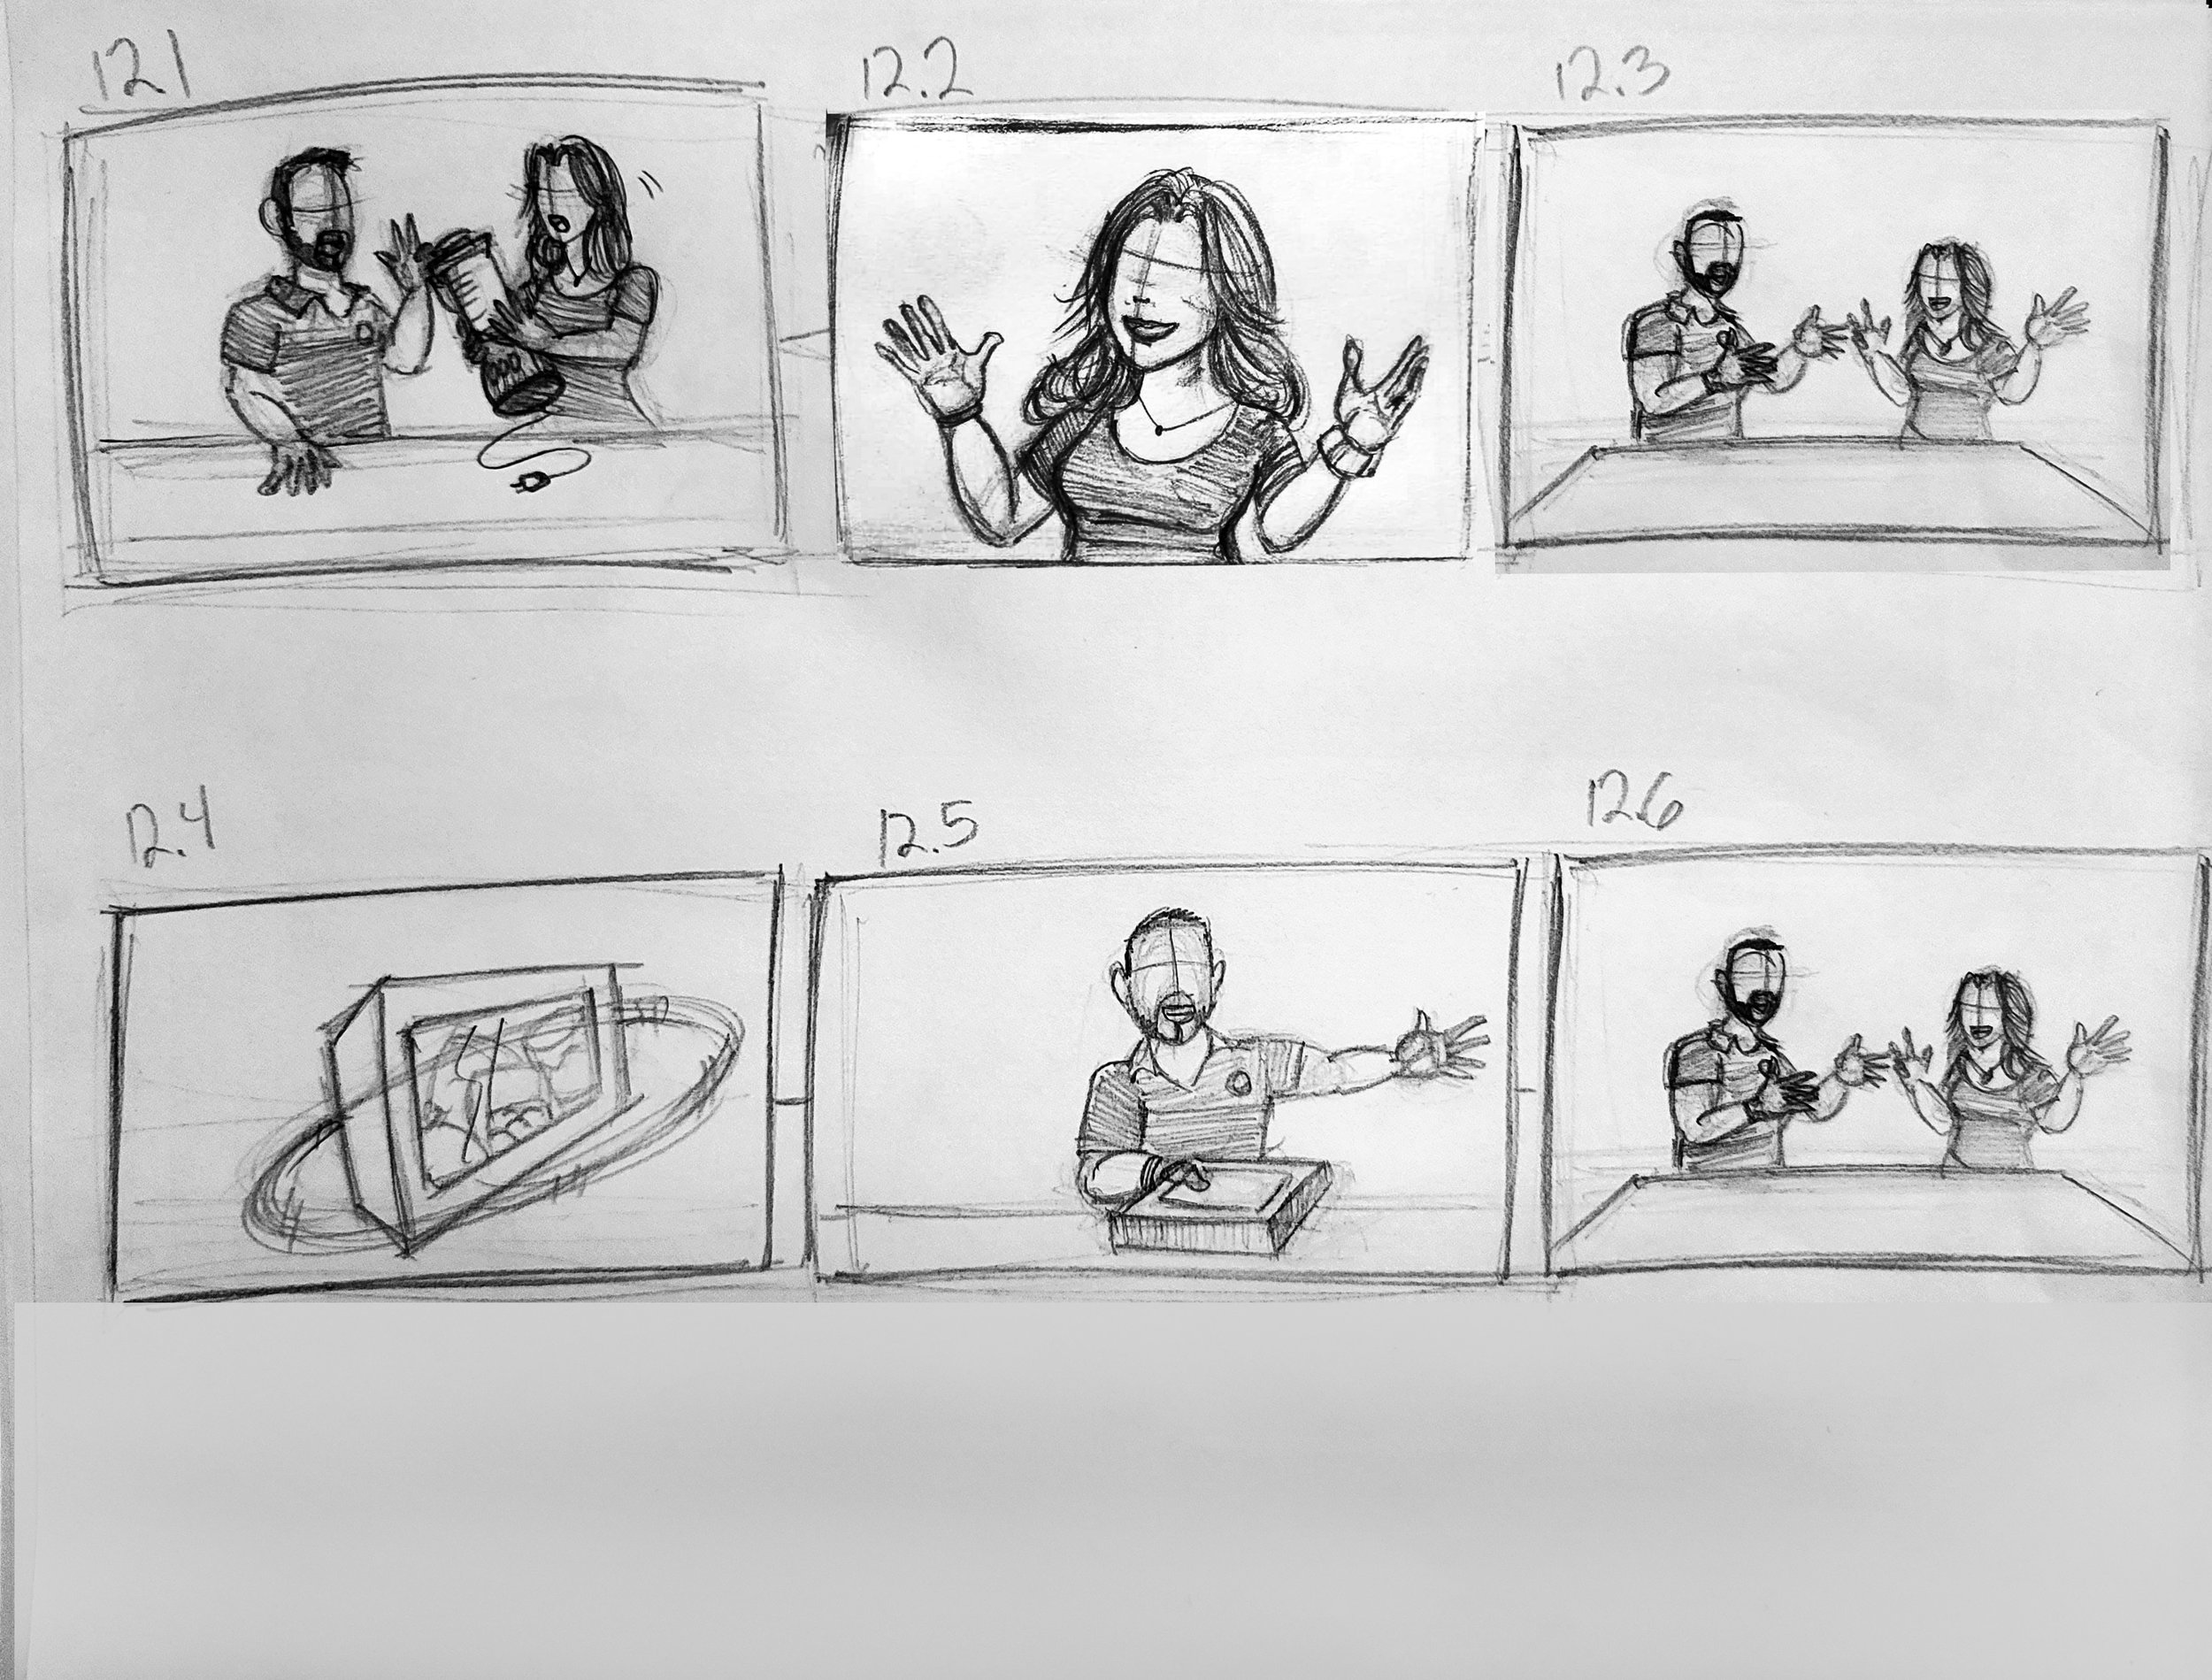 WR_Real_Suite_Eats_S1_E2_StoryBoard_Frames_12_1_to_12_6.jpg